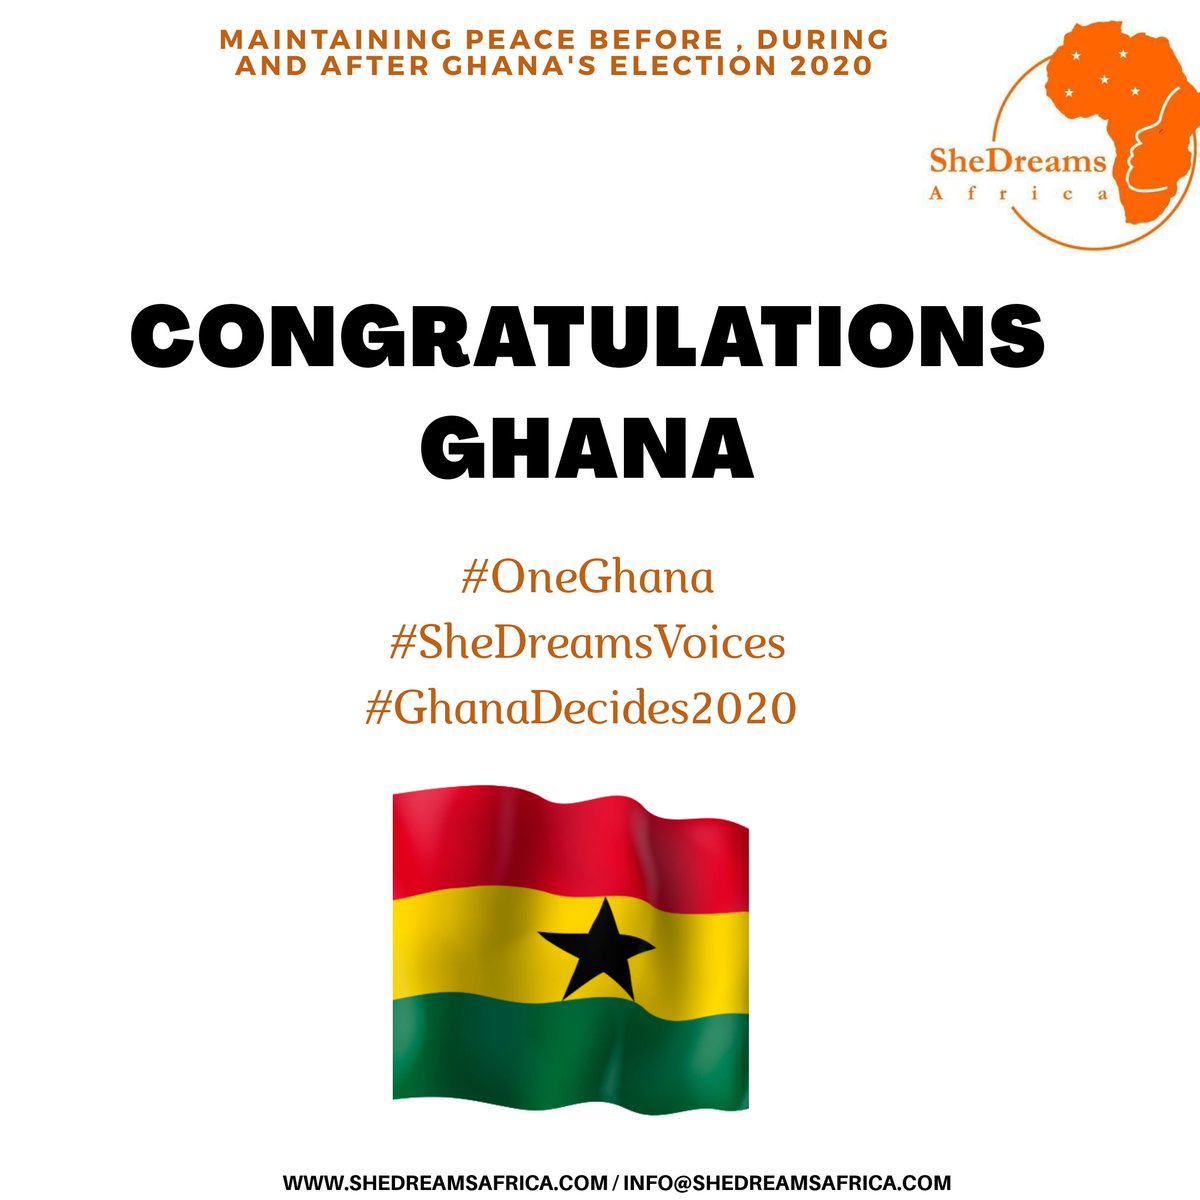 Congratulations Ghana 🇬🇭 for a #PeacefulElection!!!Congratulations to the President- Elect and all citizens. Let's continue to maintain the peace we have even after the elections. Ghana wins . #OneGhana🇬🇭 #PeacefulElections #SheDreamsAfrica #SheDreamsVoices